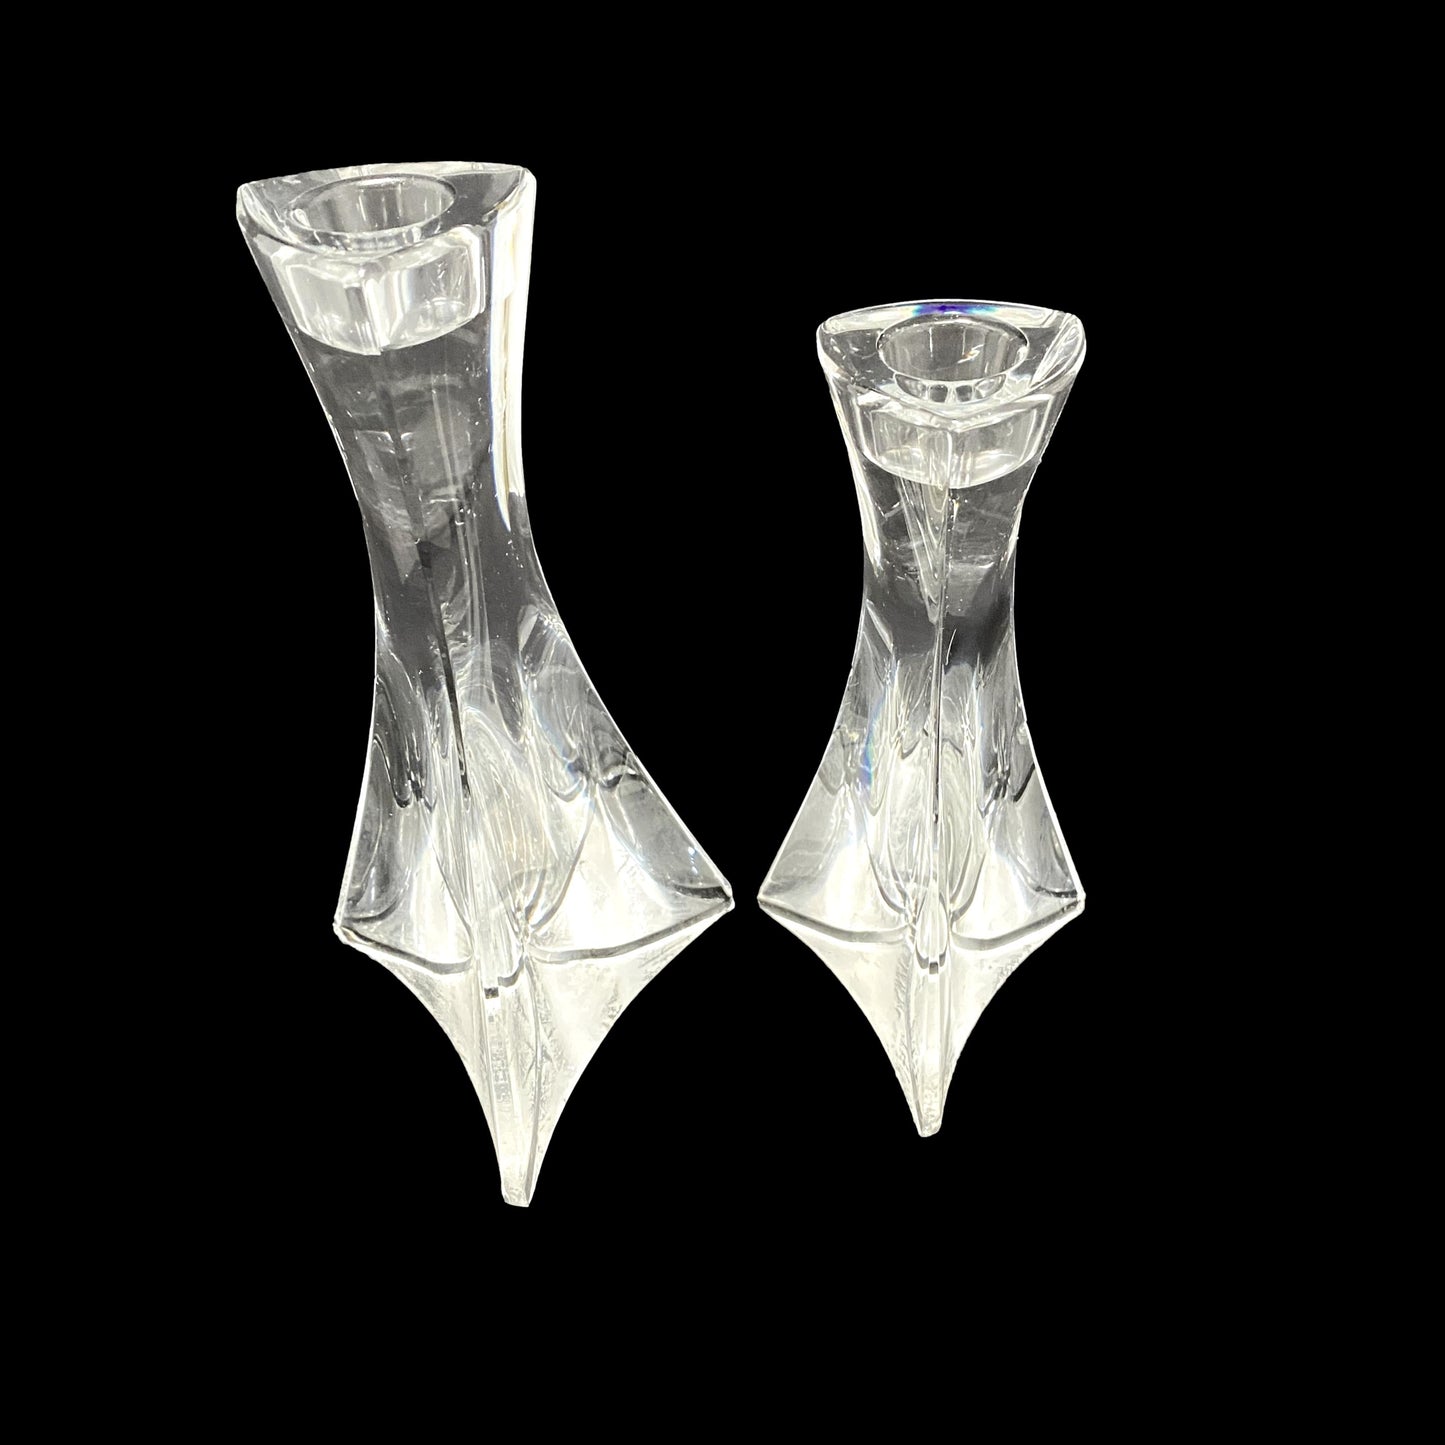 Pair of Glass Candleholders